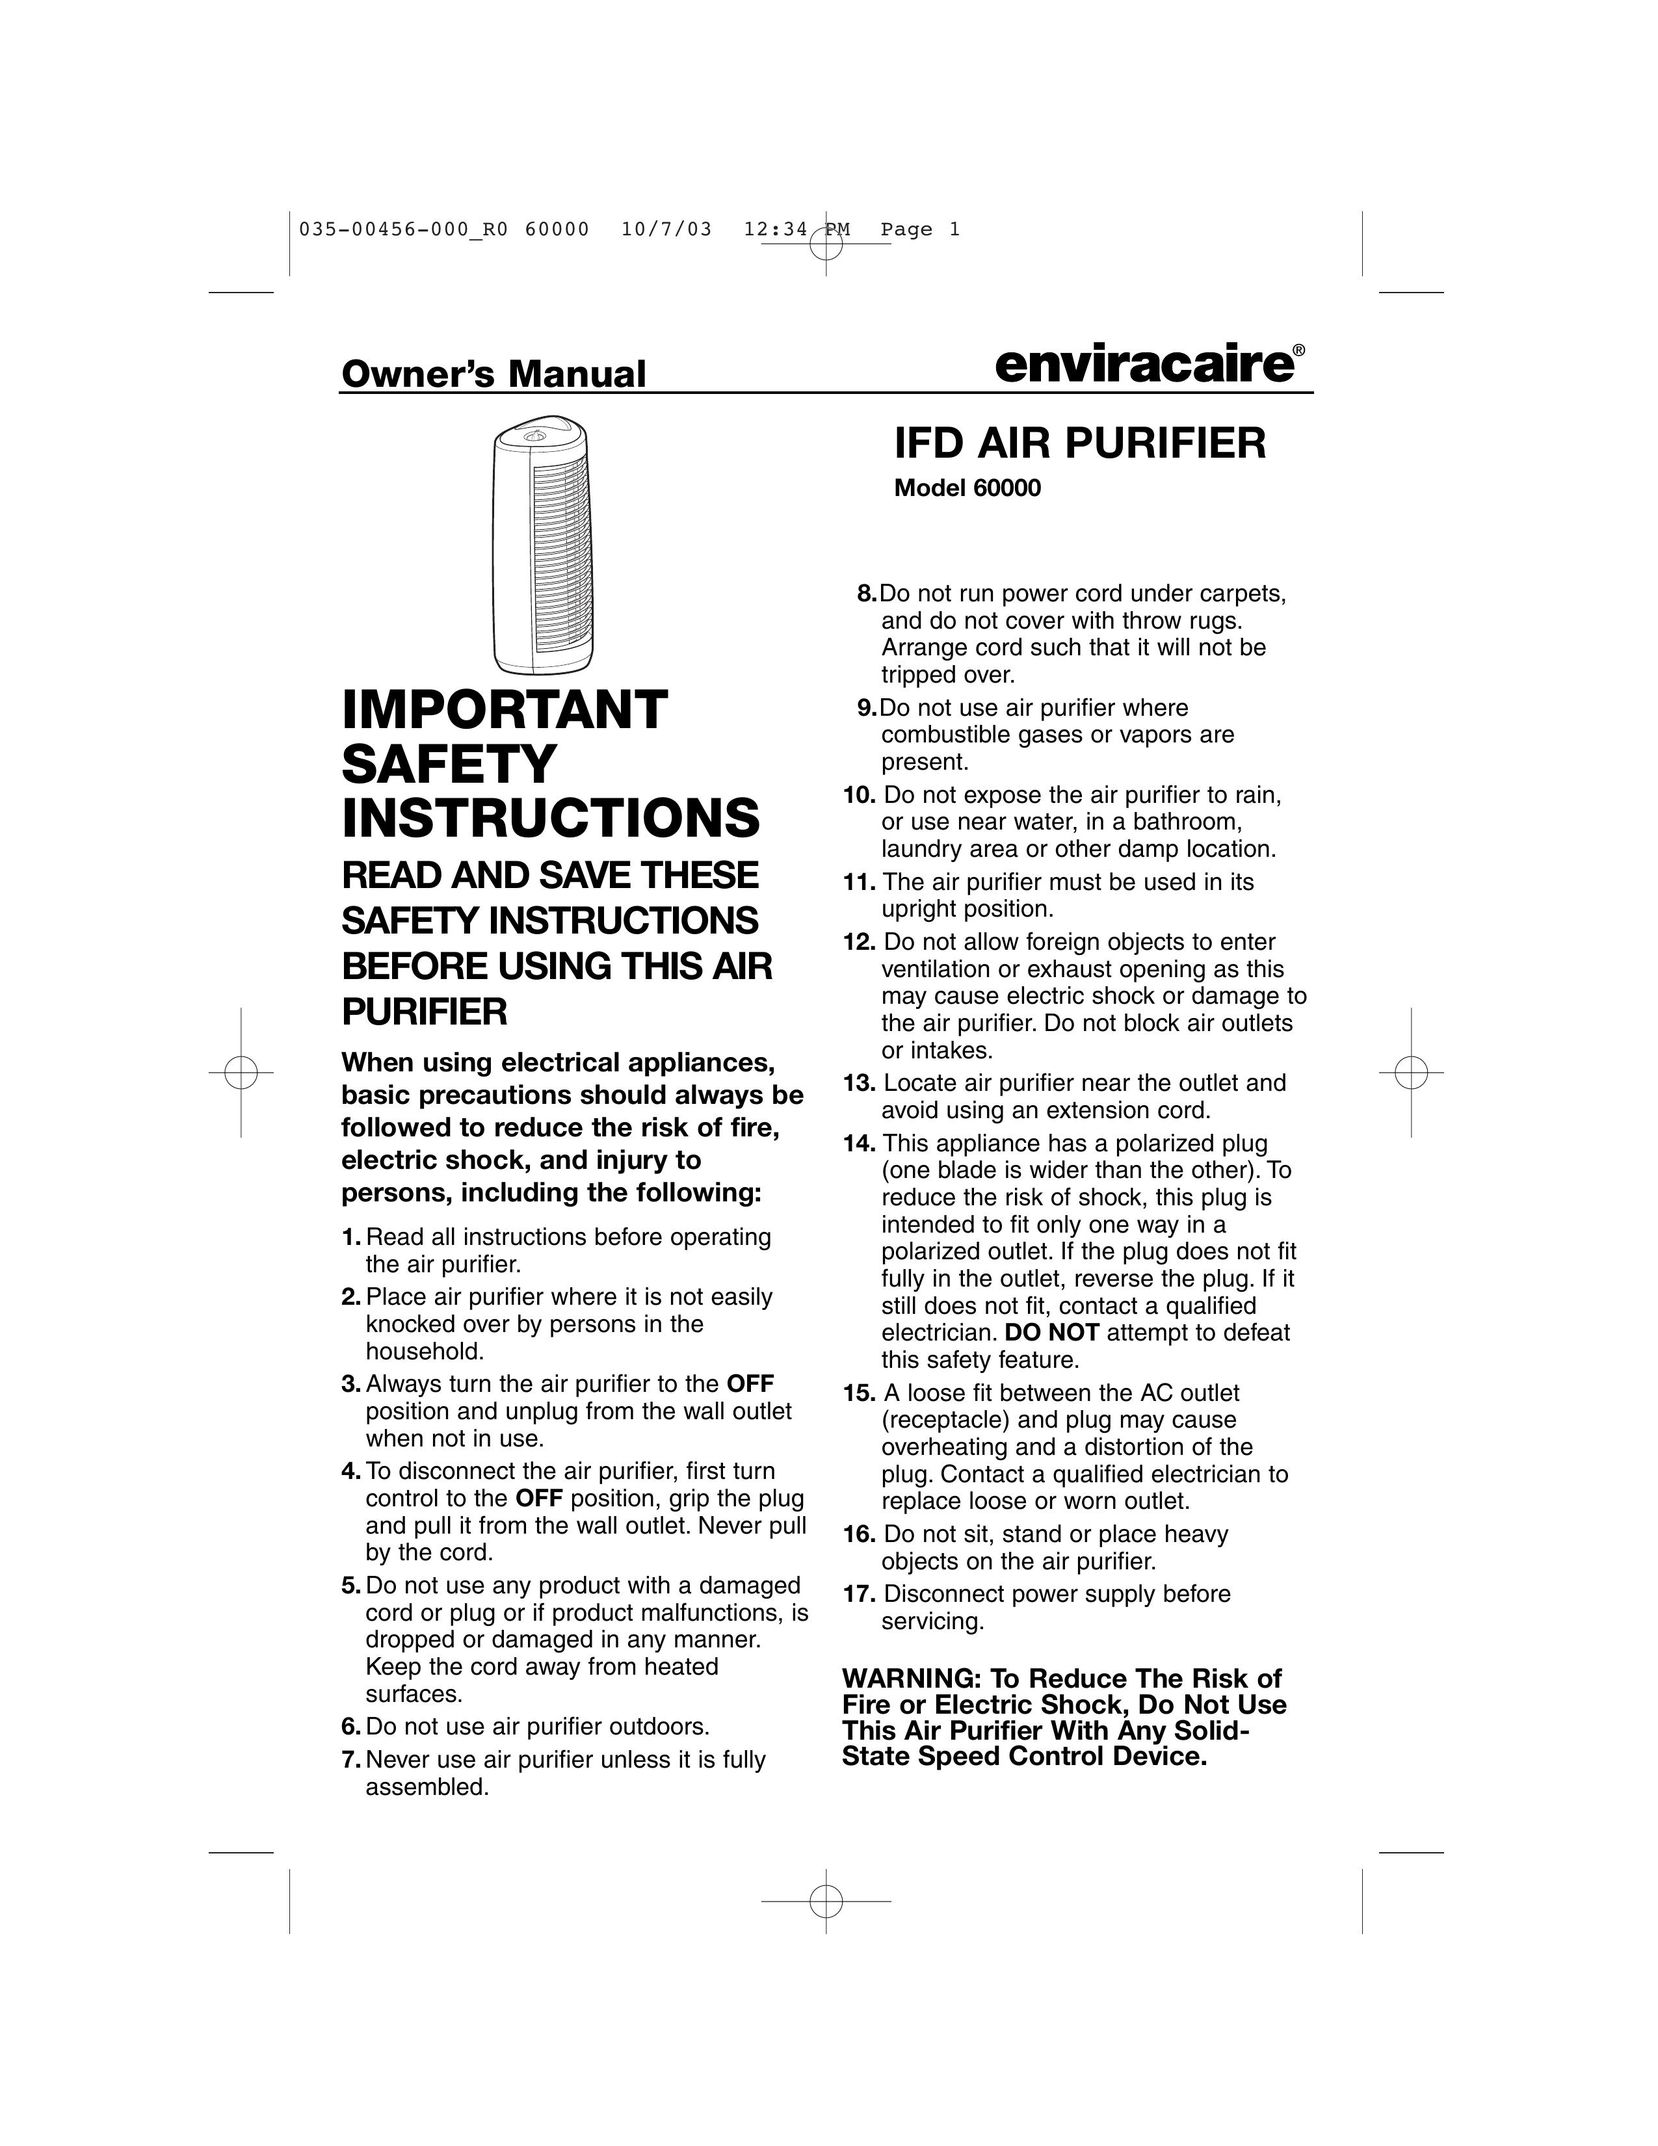 Enviracaire 60000 Air Cleaner User Manual